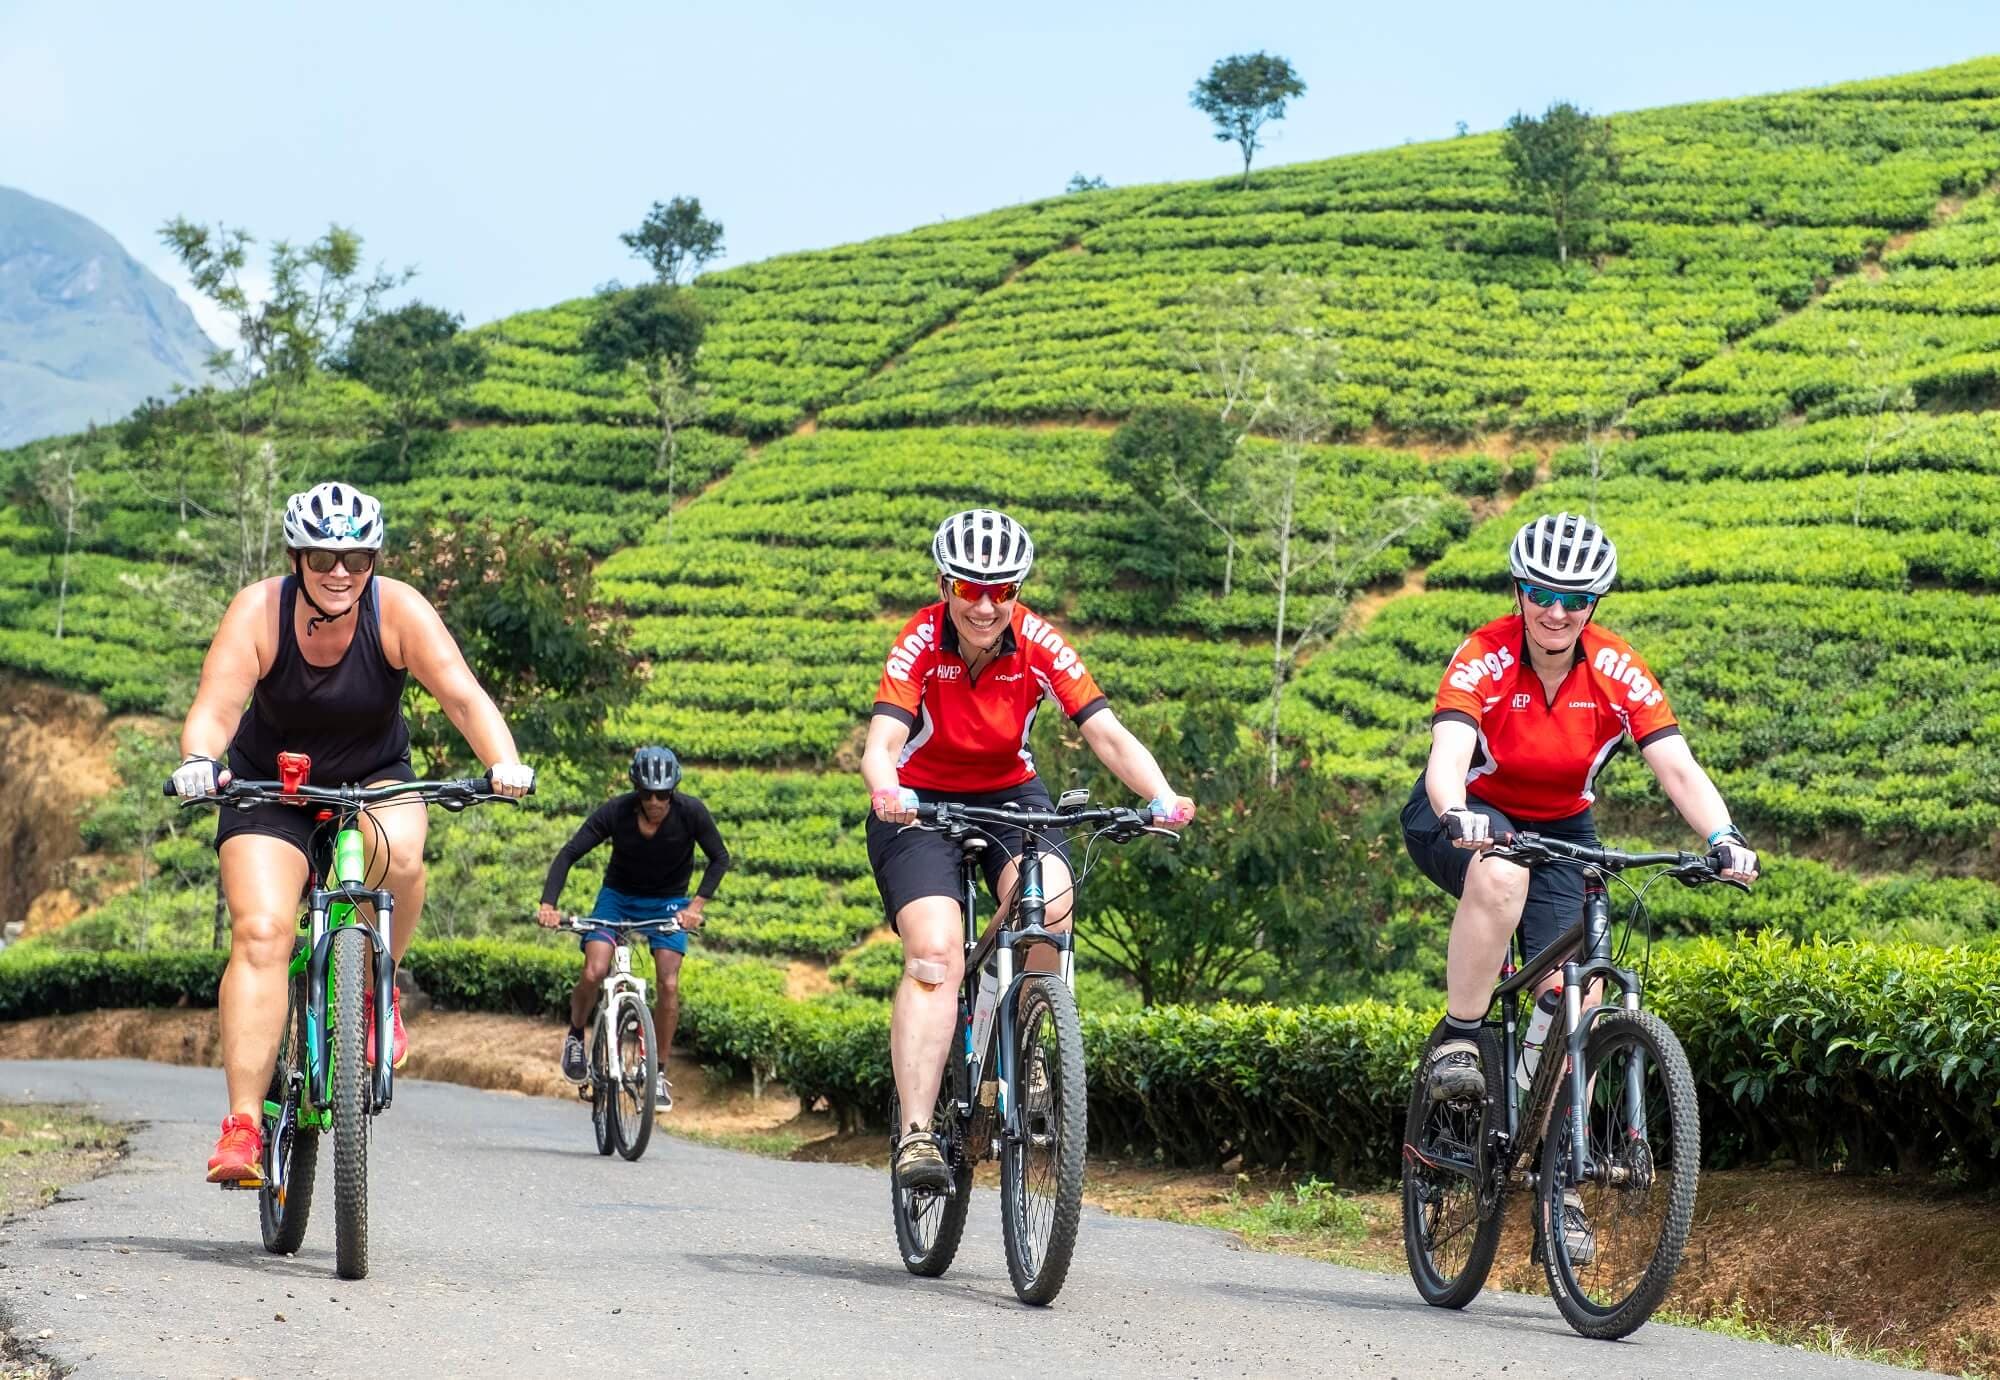 The cyclists cycling through the tea planation and explore the scenic landscaping in Nuwara Eliya